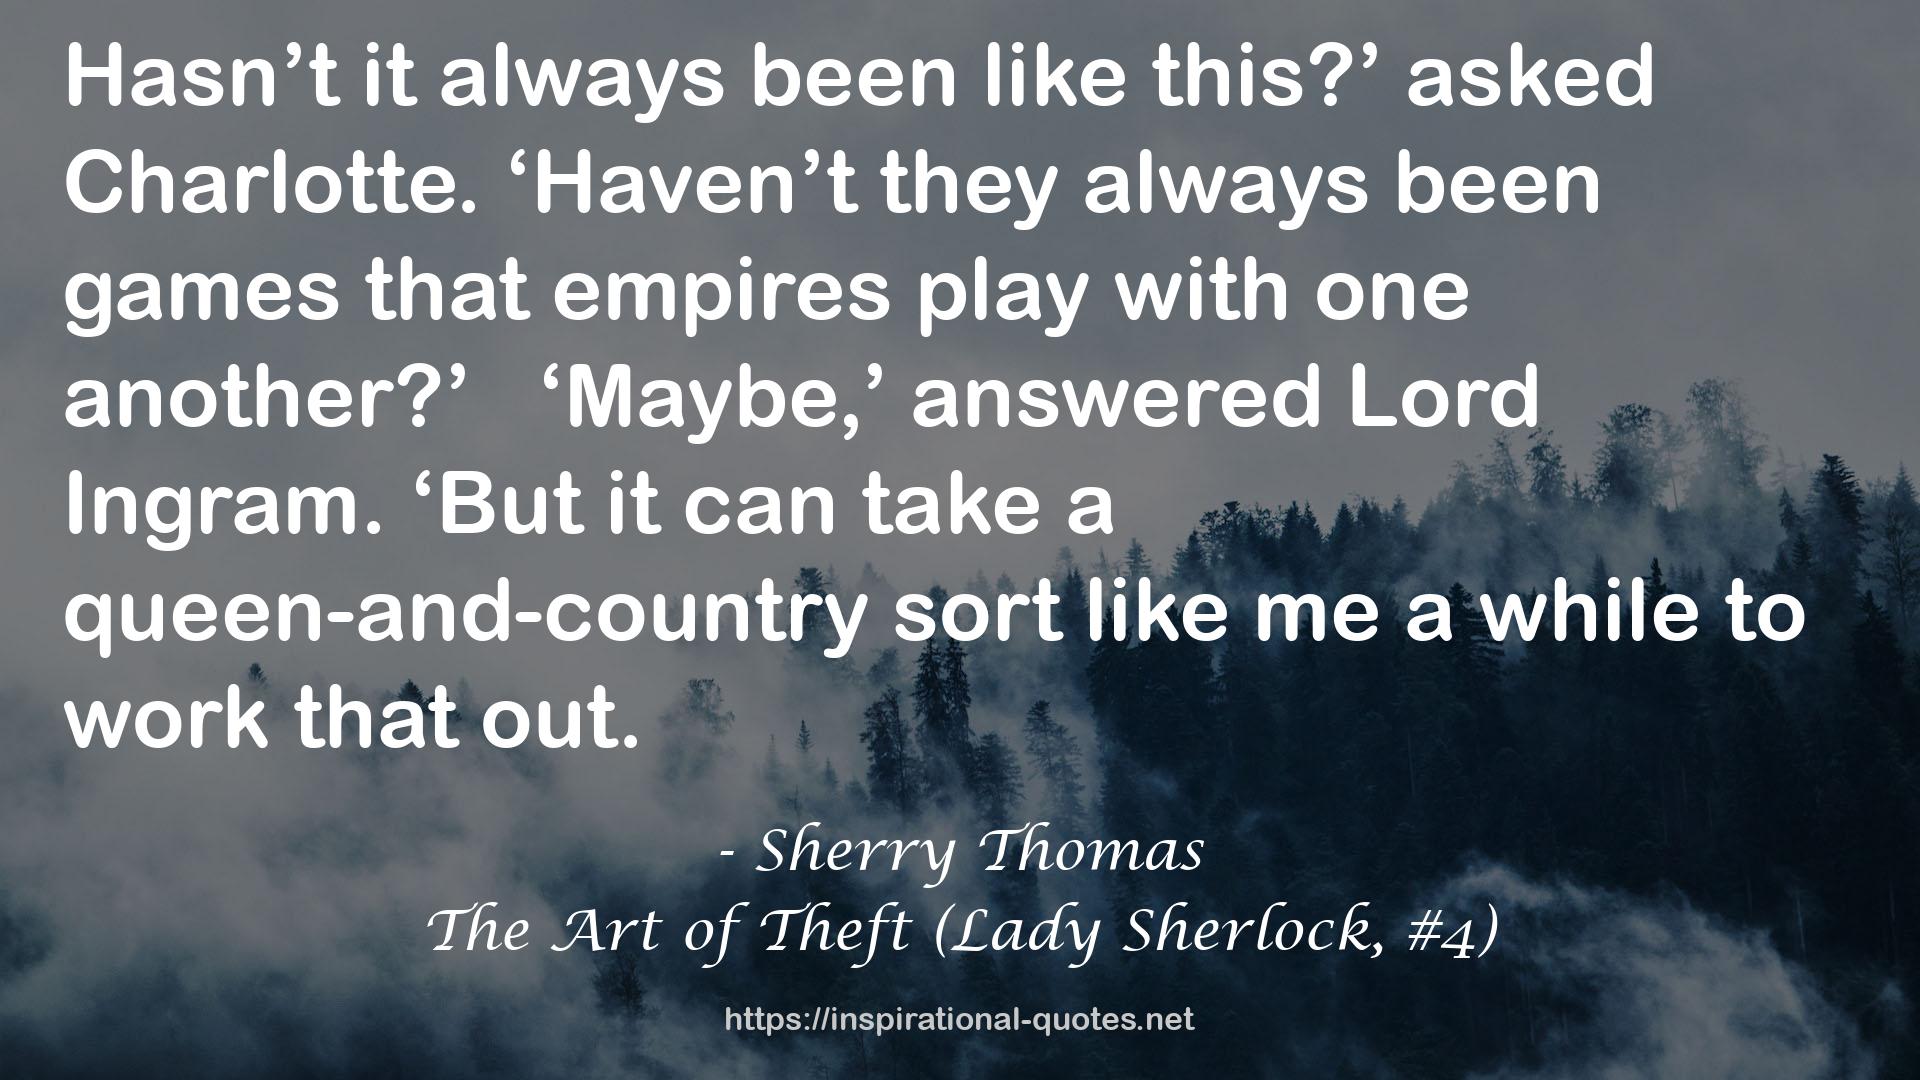 The Art of Theft (Lady Sherlock, #4) QUOTES